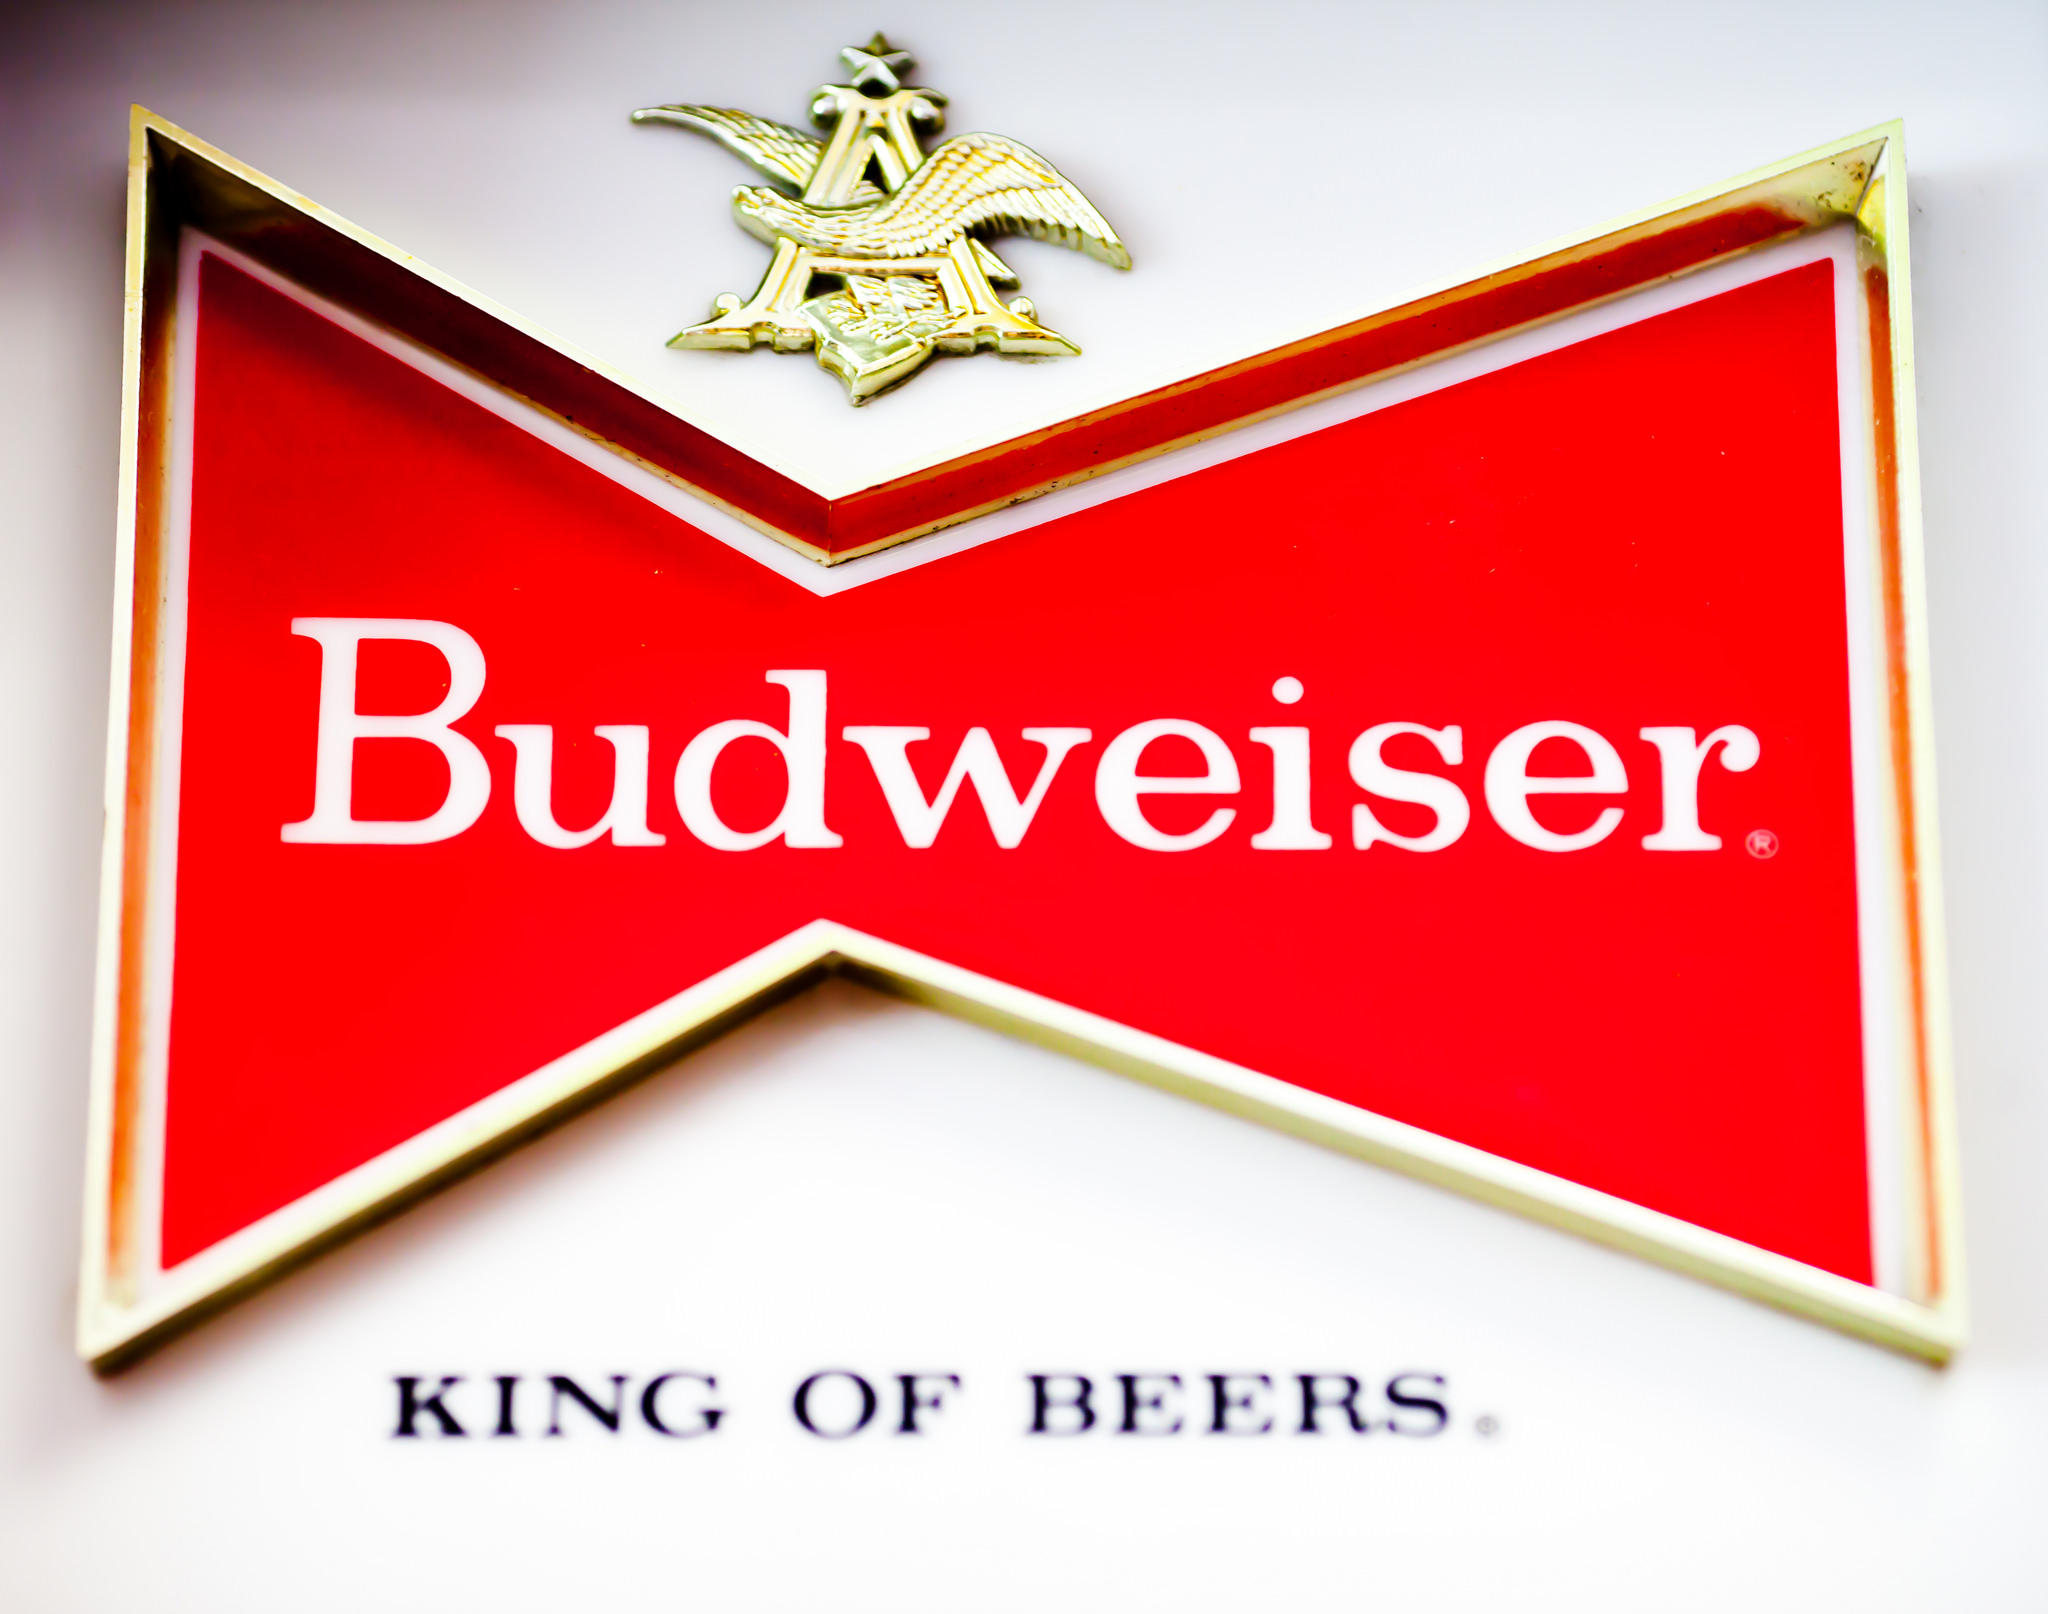 Budweiser, the self-dubbed “King of Beers,” is one of countless brands to stretch reality to make a marketing impact. Photo credit: Thomas Hawk, Flickr Creative Commons